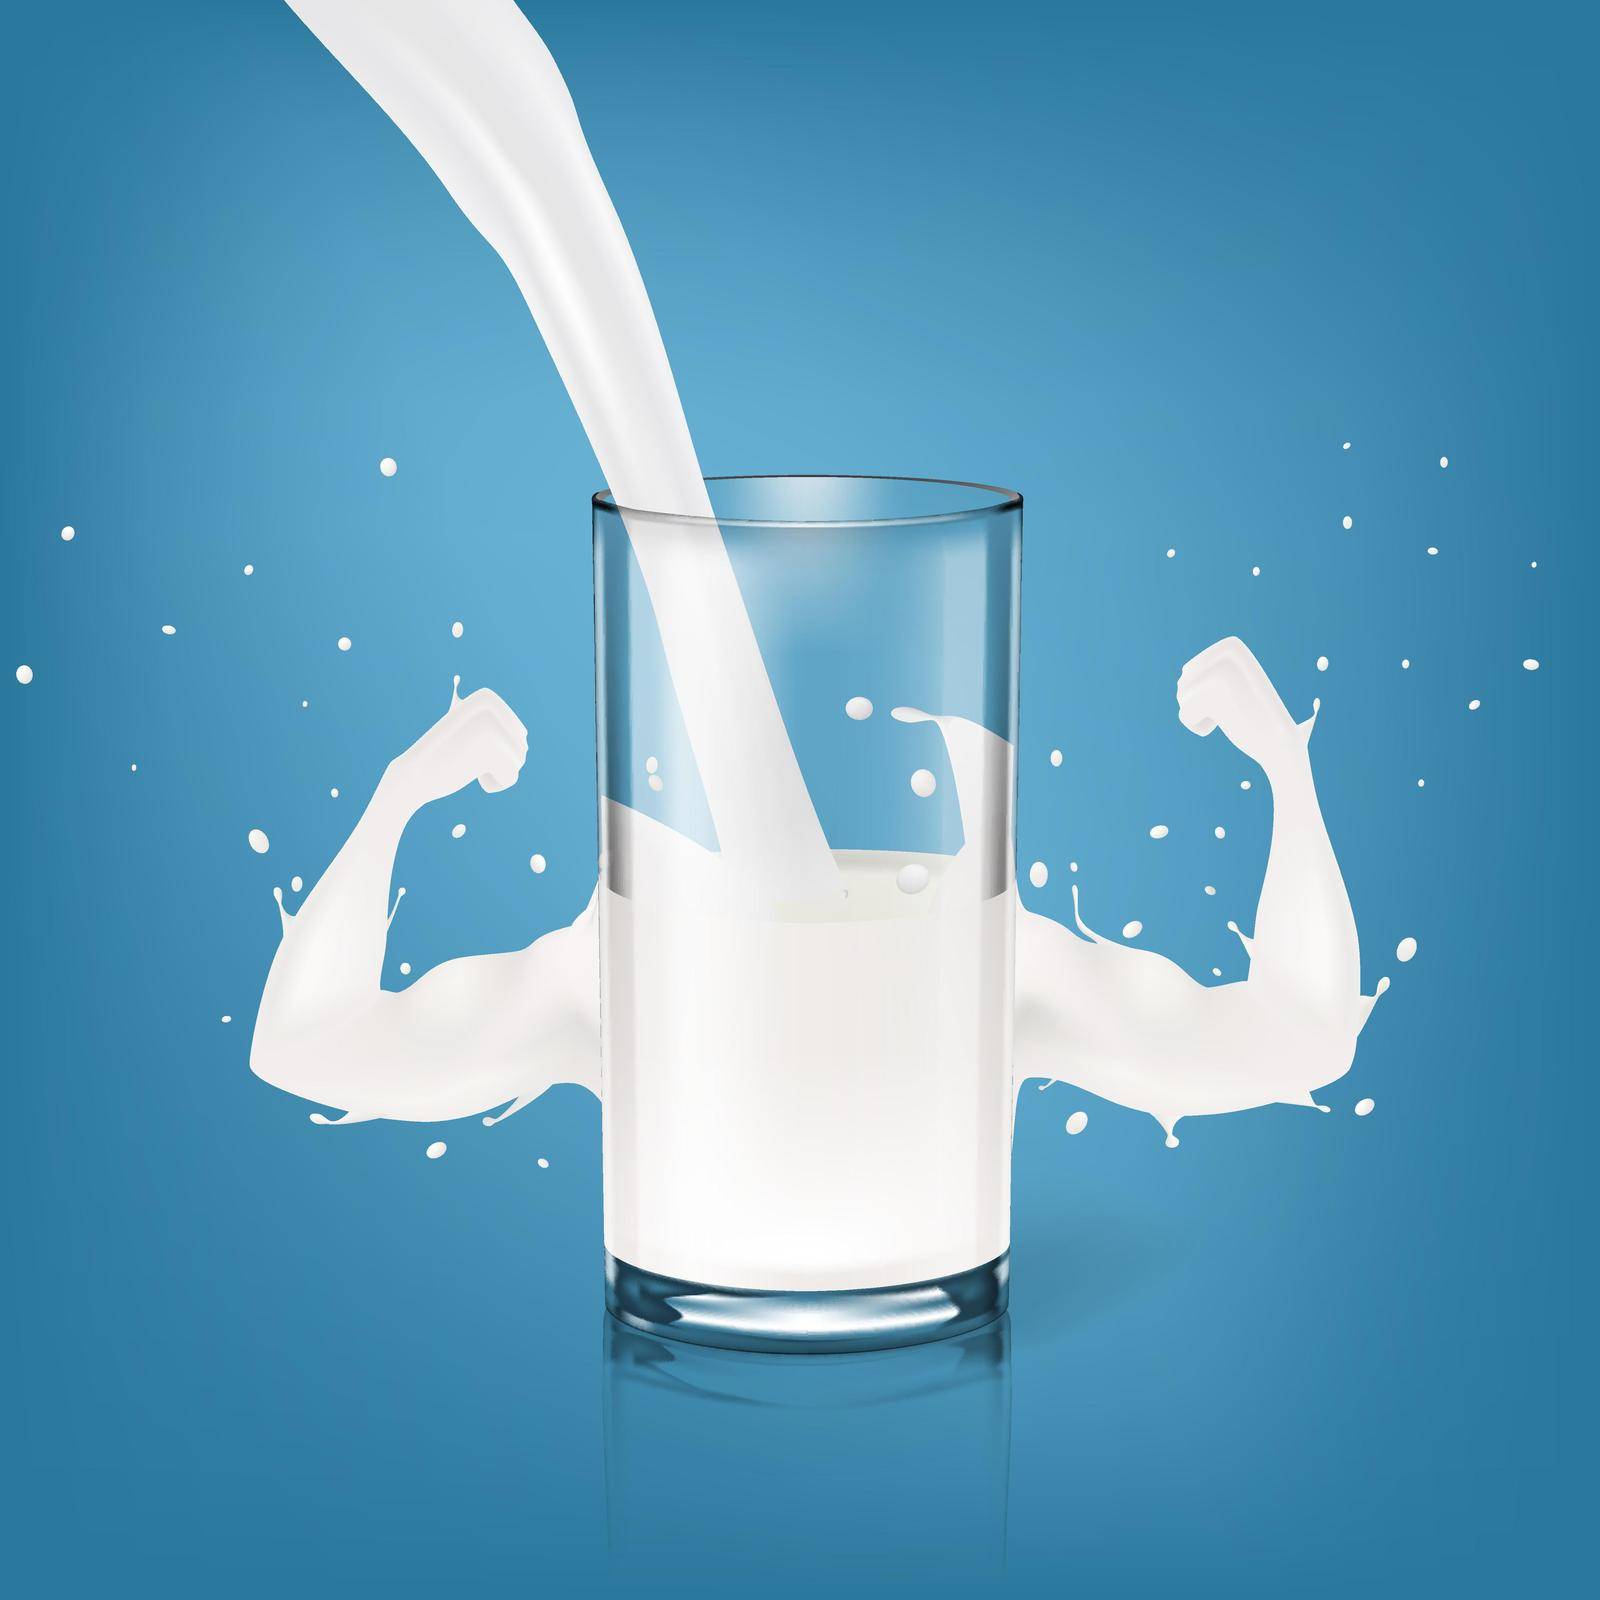 Splash Of Milk In Form Of Strong Arm Concept by VectorThings